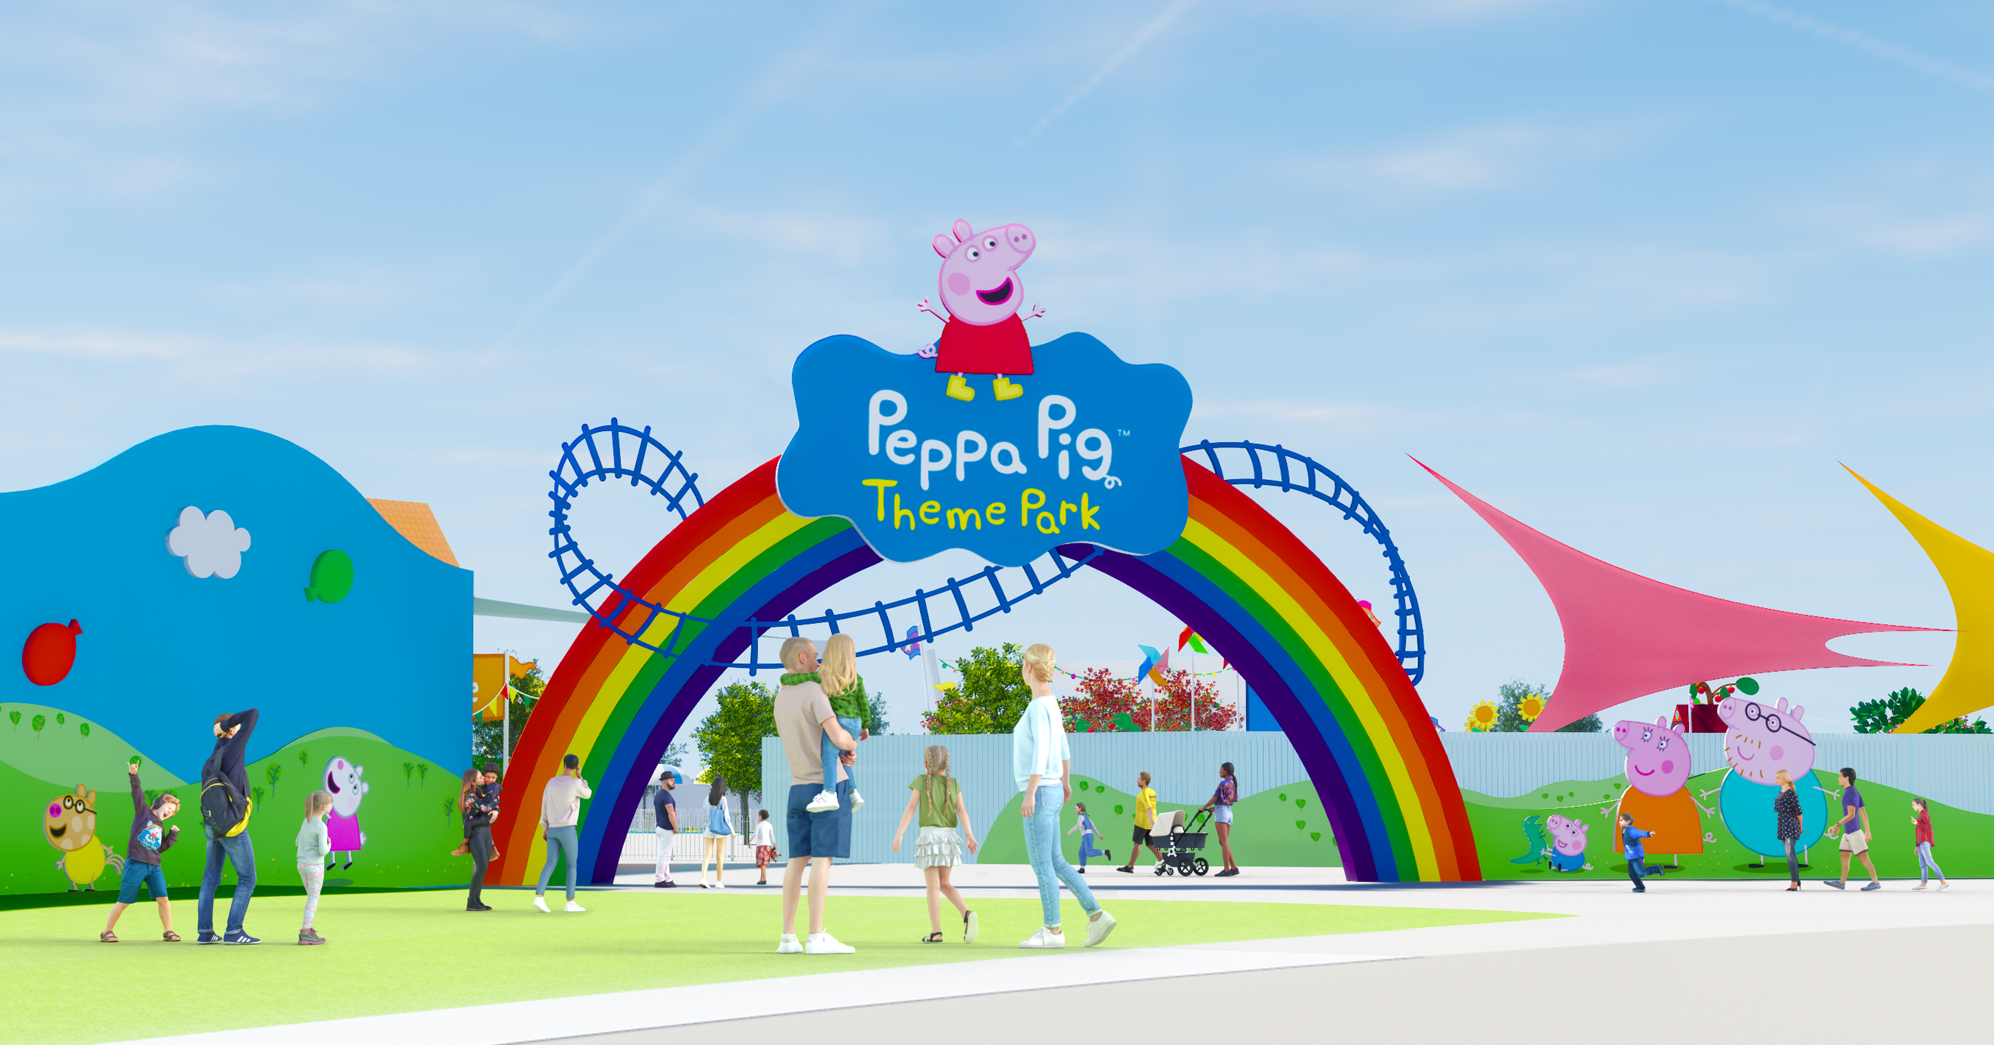 British cartoon Peppa Pig to get her own theme park at Legoland Florida in 2022